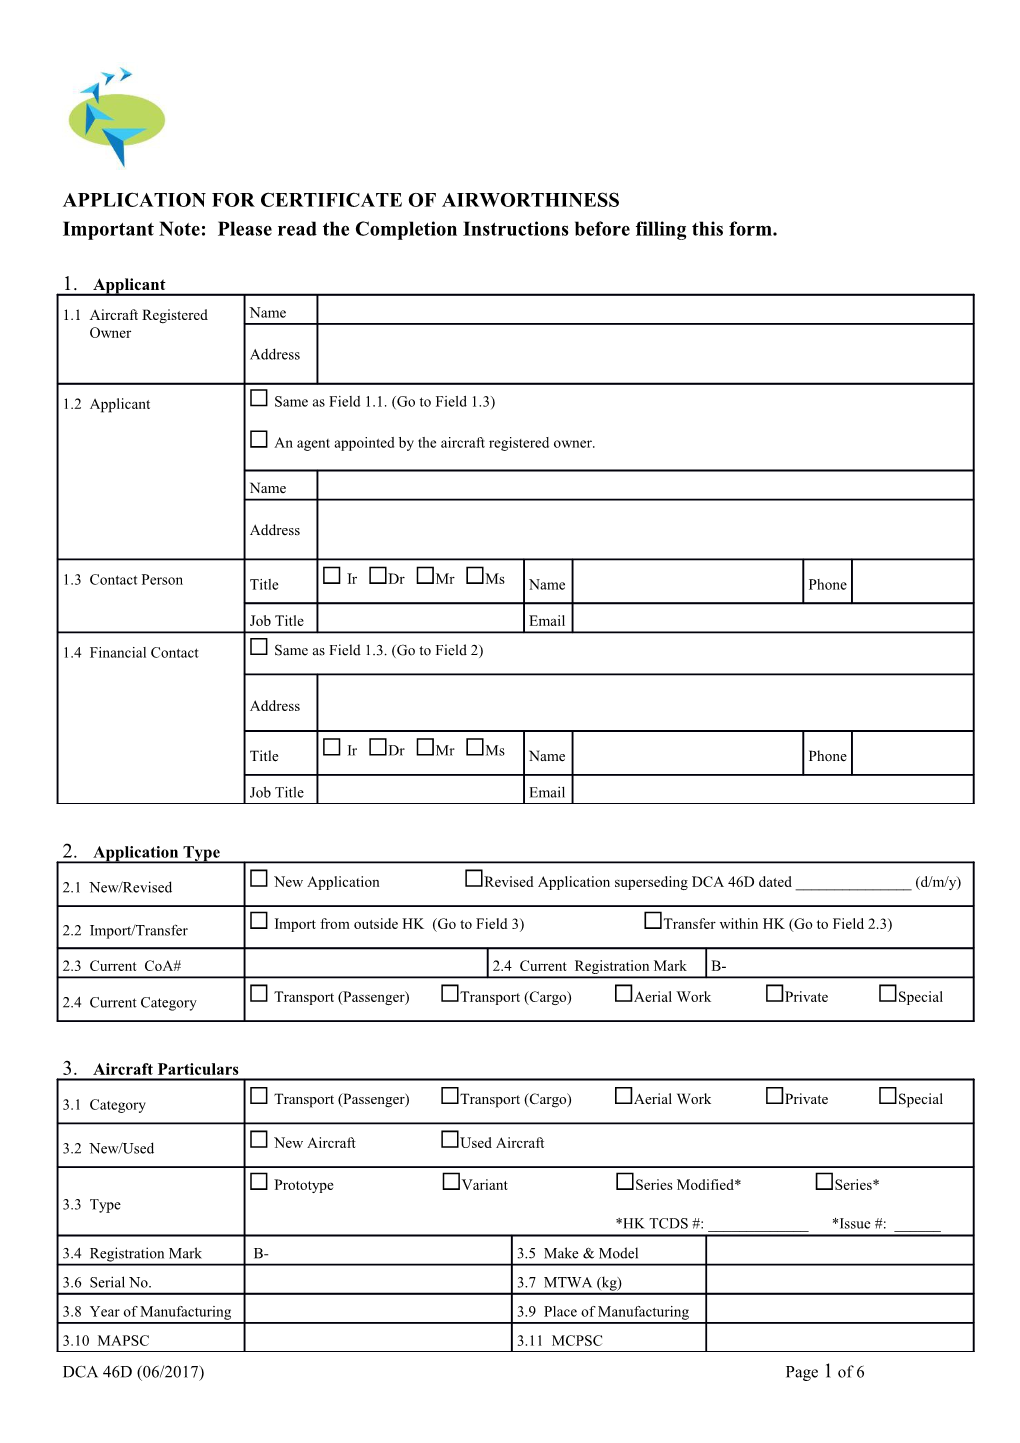 Application for Certificate of Airworthiness